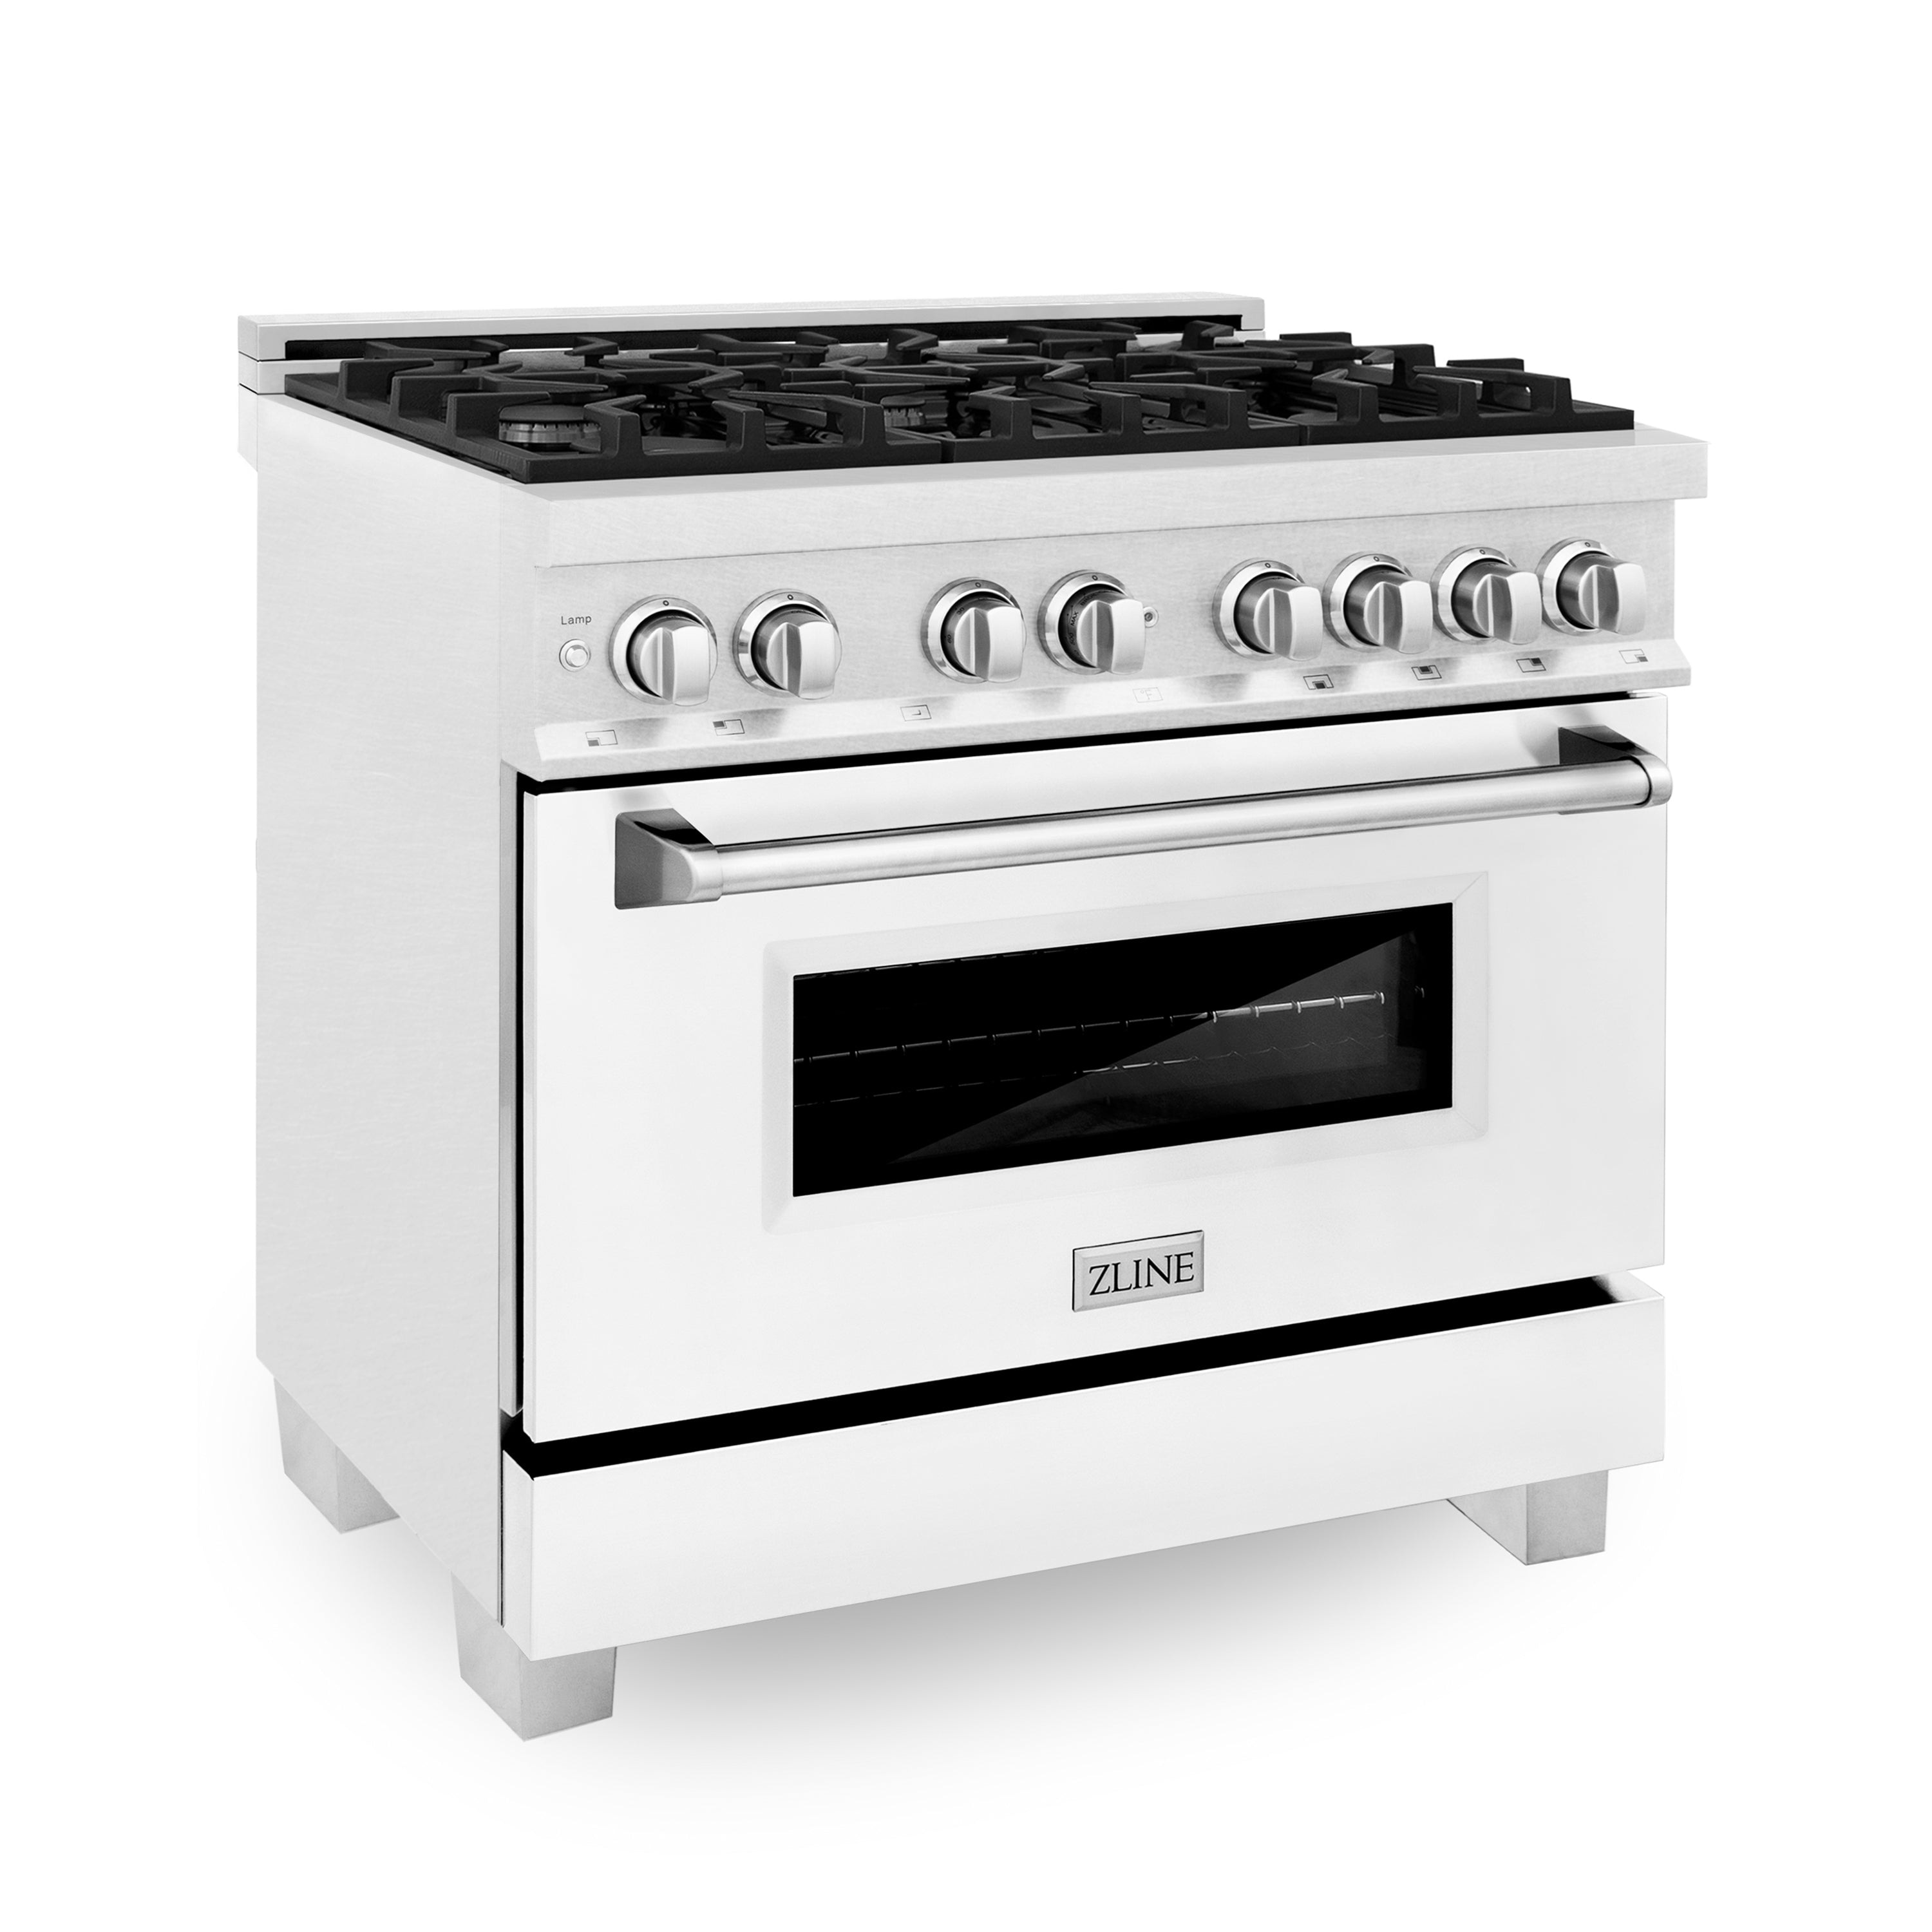 Zline Kitchen and Bath ZLINE 36" 4.6 cu. ft. Dual Fuel Range with Gas Stove and Electric Oven in in Fingerprint Resistant Stainless Steel